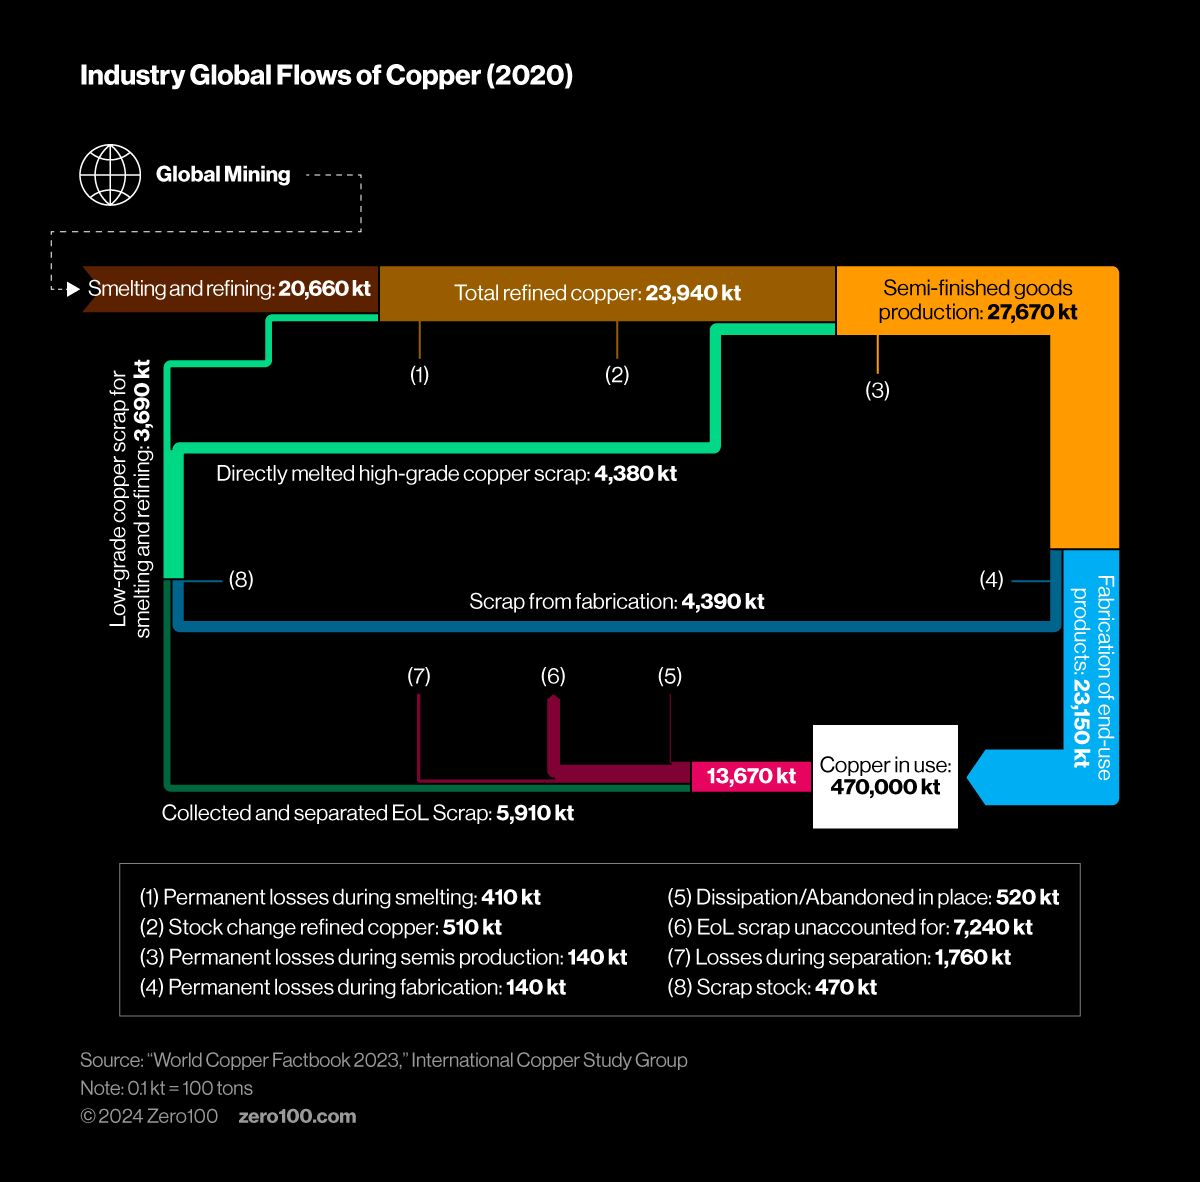 Chart showing the industry global flow of copper.
Source: "World Copper Factbook 2023," International Copper Study Group.